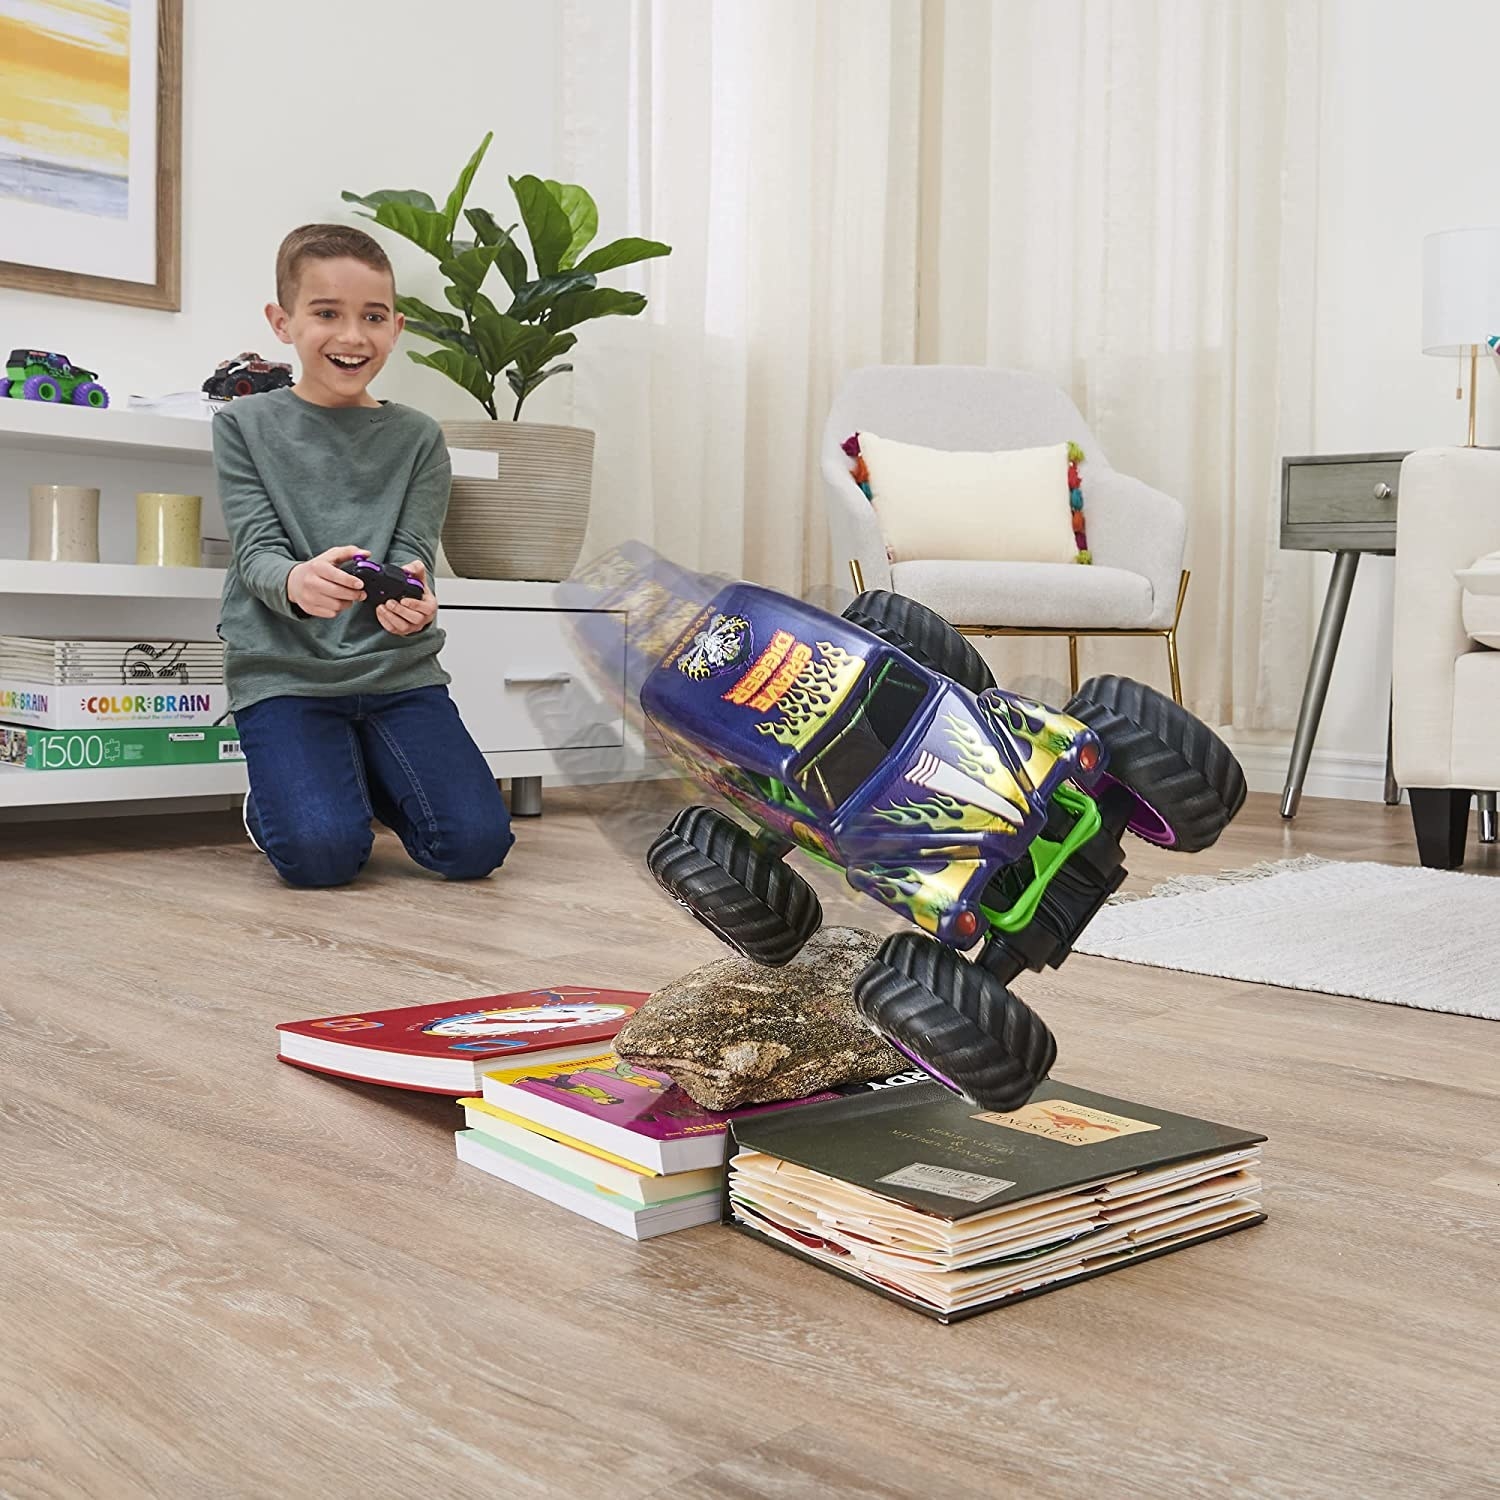 Child model playing with remote control Grave Digger truck